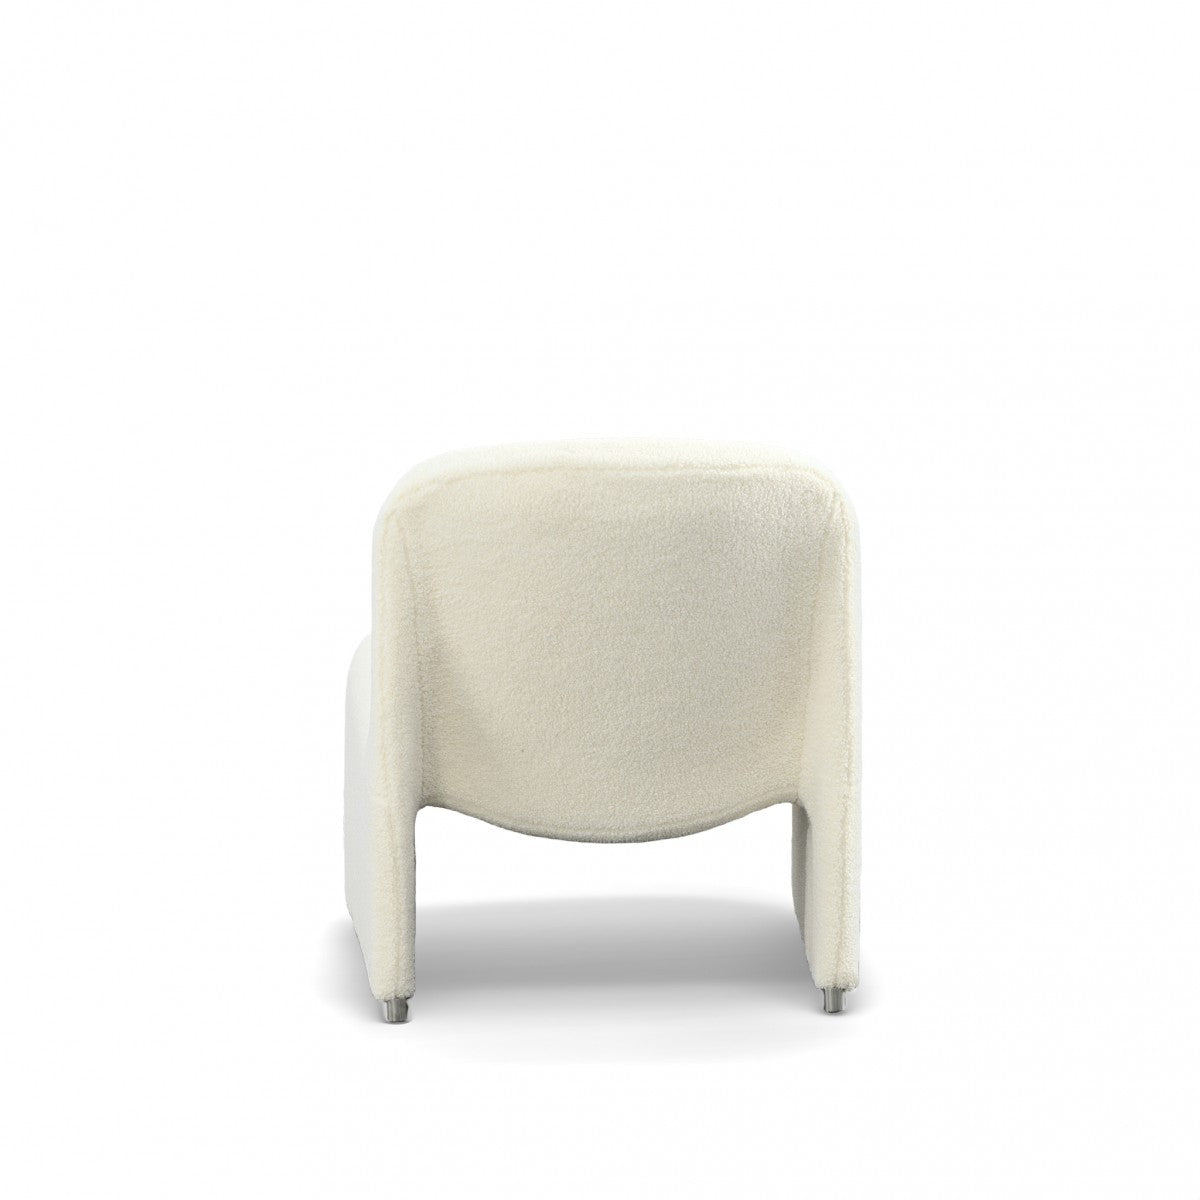 Declo Modern Fabric Accent Chair